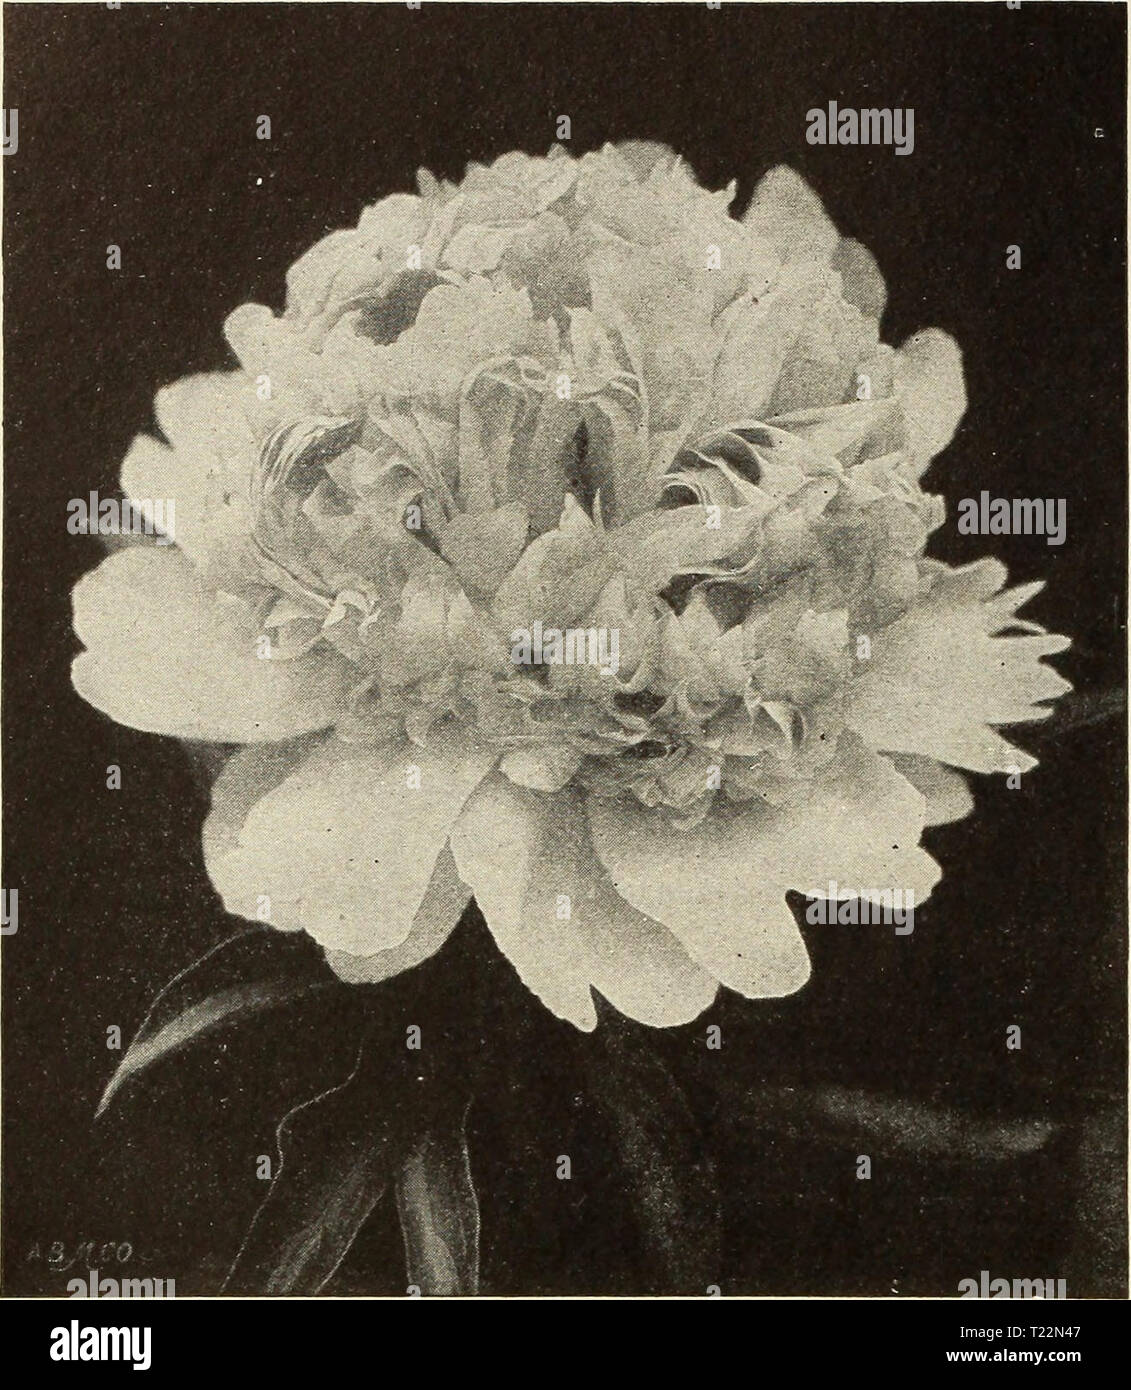 Archive image from page 93 of Dingee guide to rose culture Dingee guide to rose culture  dingeeguidetoros19ding 7 Year: 1916  FOUMDEI 1850 biNGEE Guide To Rose Culture FOUNDED, 1850    Peony. New and Rare Peonies Price, strong roots, 50c each. Set of 8 superb varieties, postpaid, for $3.25. Edulis Superba—Red. Faust—Delicate light pink. Felix Crousse—Brilliant red. Extra fine, Humei Carnea—Light rose, passing into white. Insignis—Beautiful violet pink. Jeanne D'Arc—Pure white. Nobilissima—Dark violet red. Festiva Maxima—White center, flaked red. Double Peonies Price, 40c each; $3.00 per dozen. Stock Photo